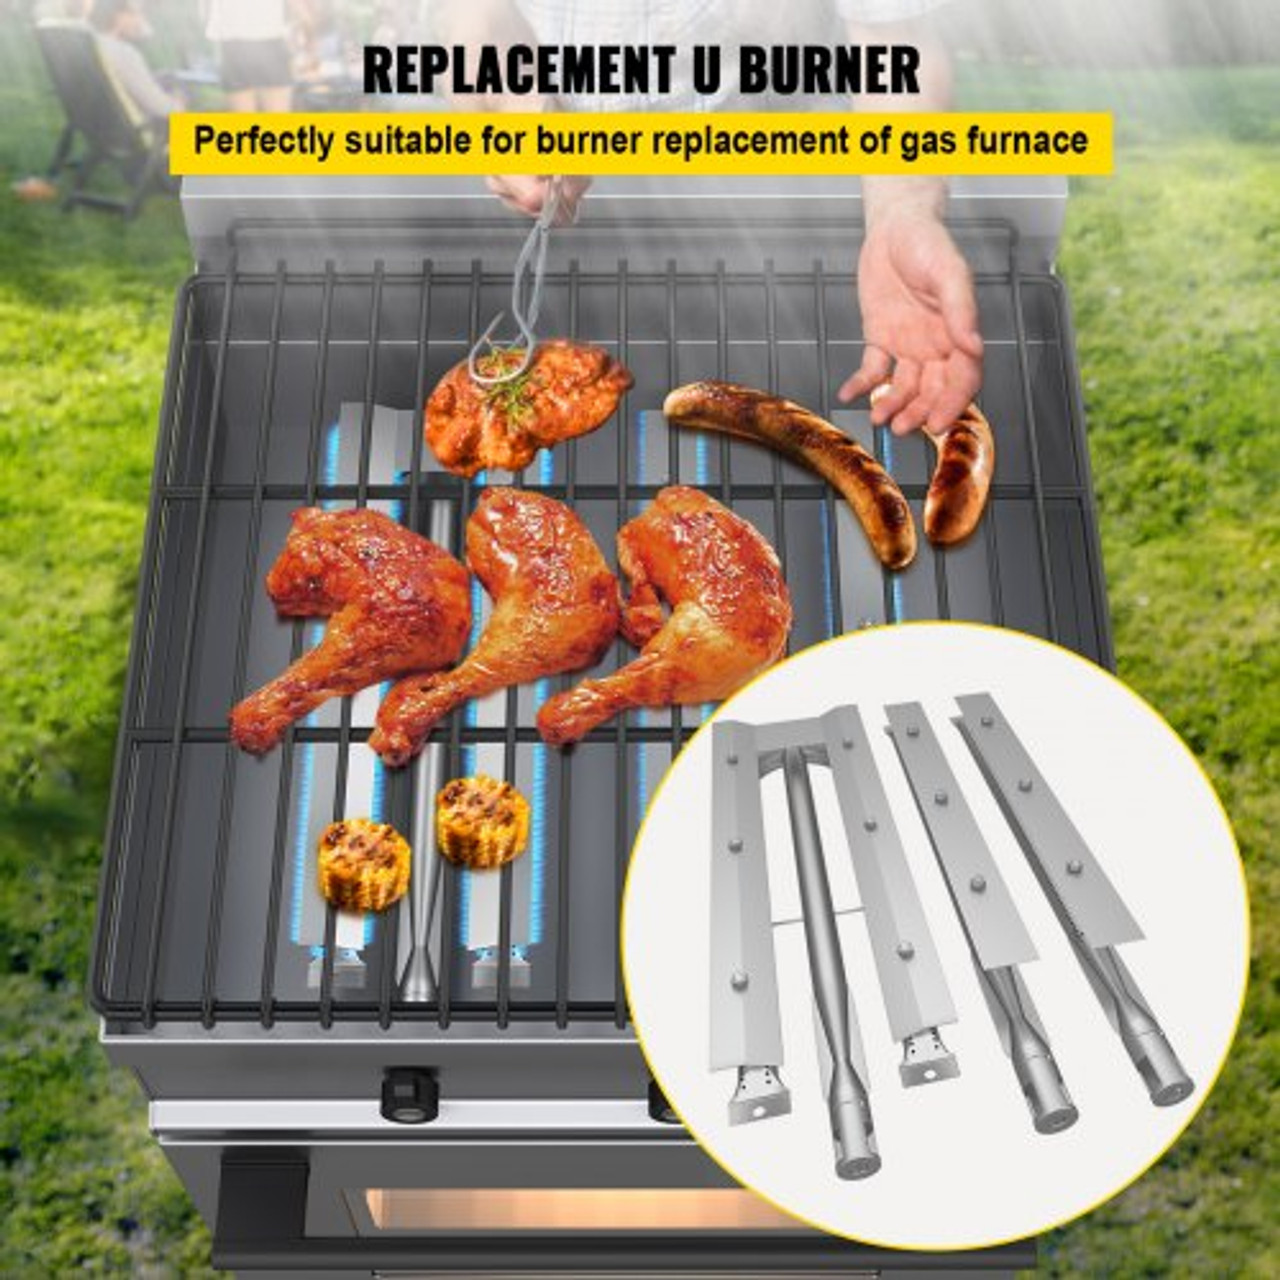 BBQ Burners Replacement, Stainless Steel Burner Grill Part Kit, 3 Packs BBQ Burners Replacement, Grill Burner Replacement w/ Air Flap Barbecue Replacement Parts w/ Evenly Burning for Gas Grills